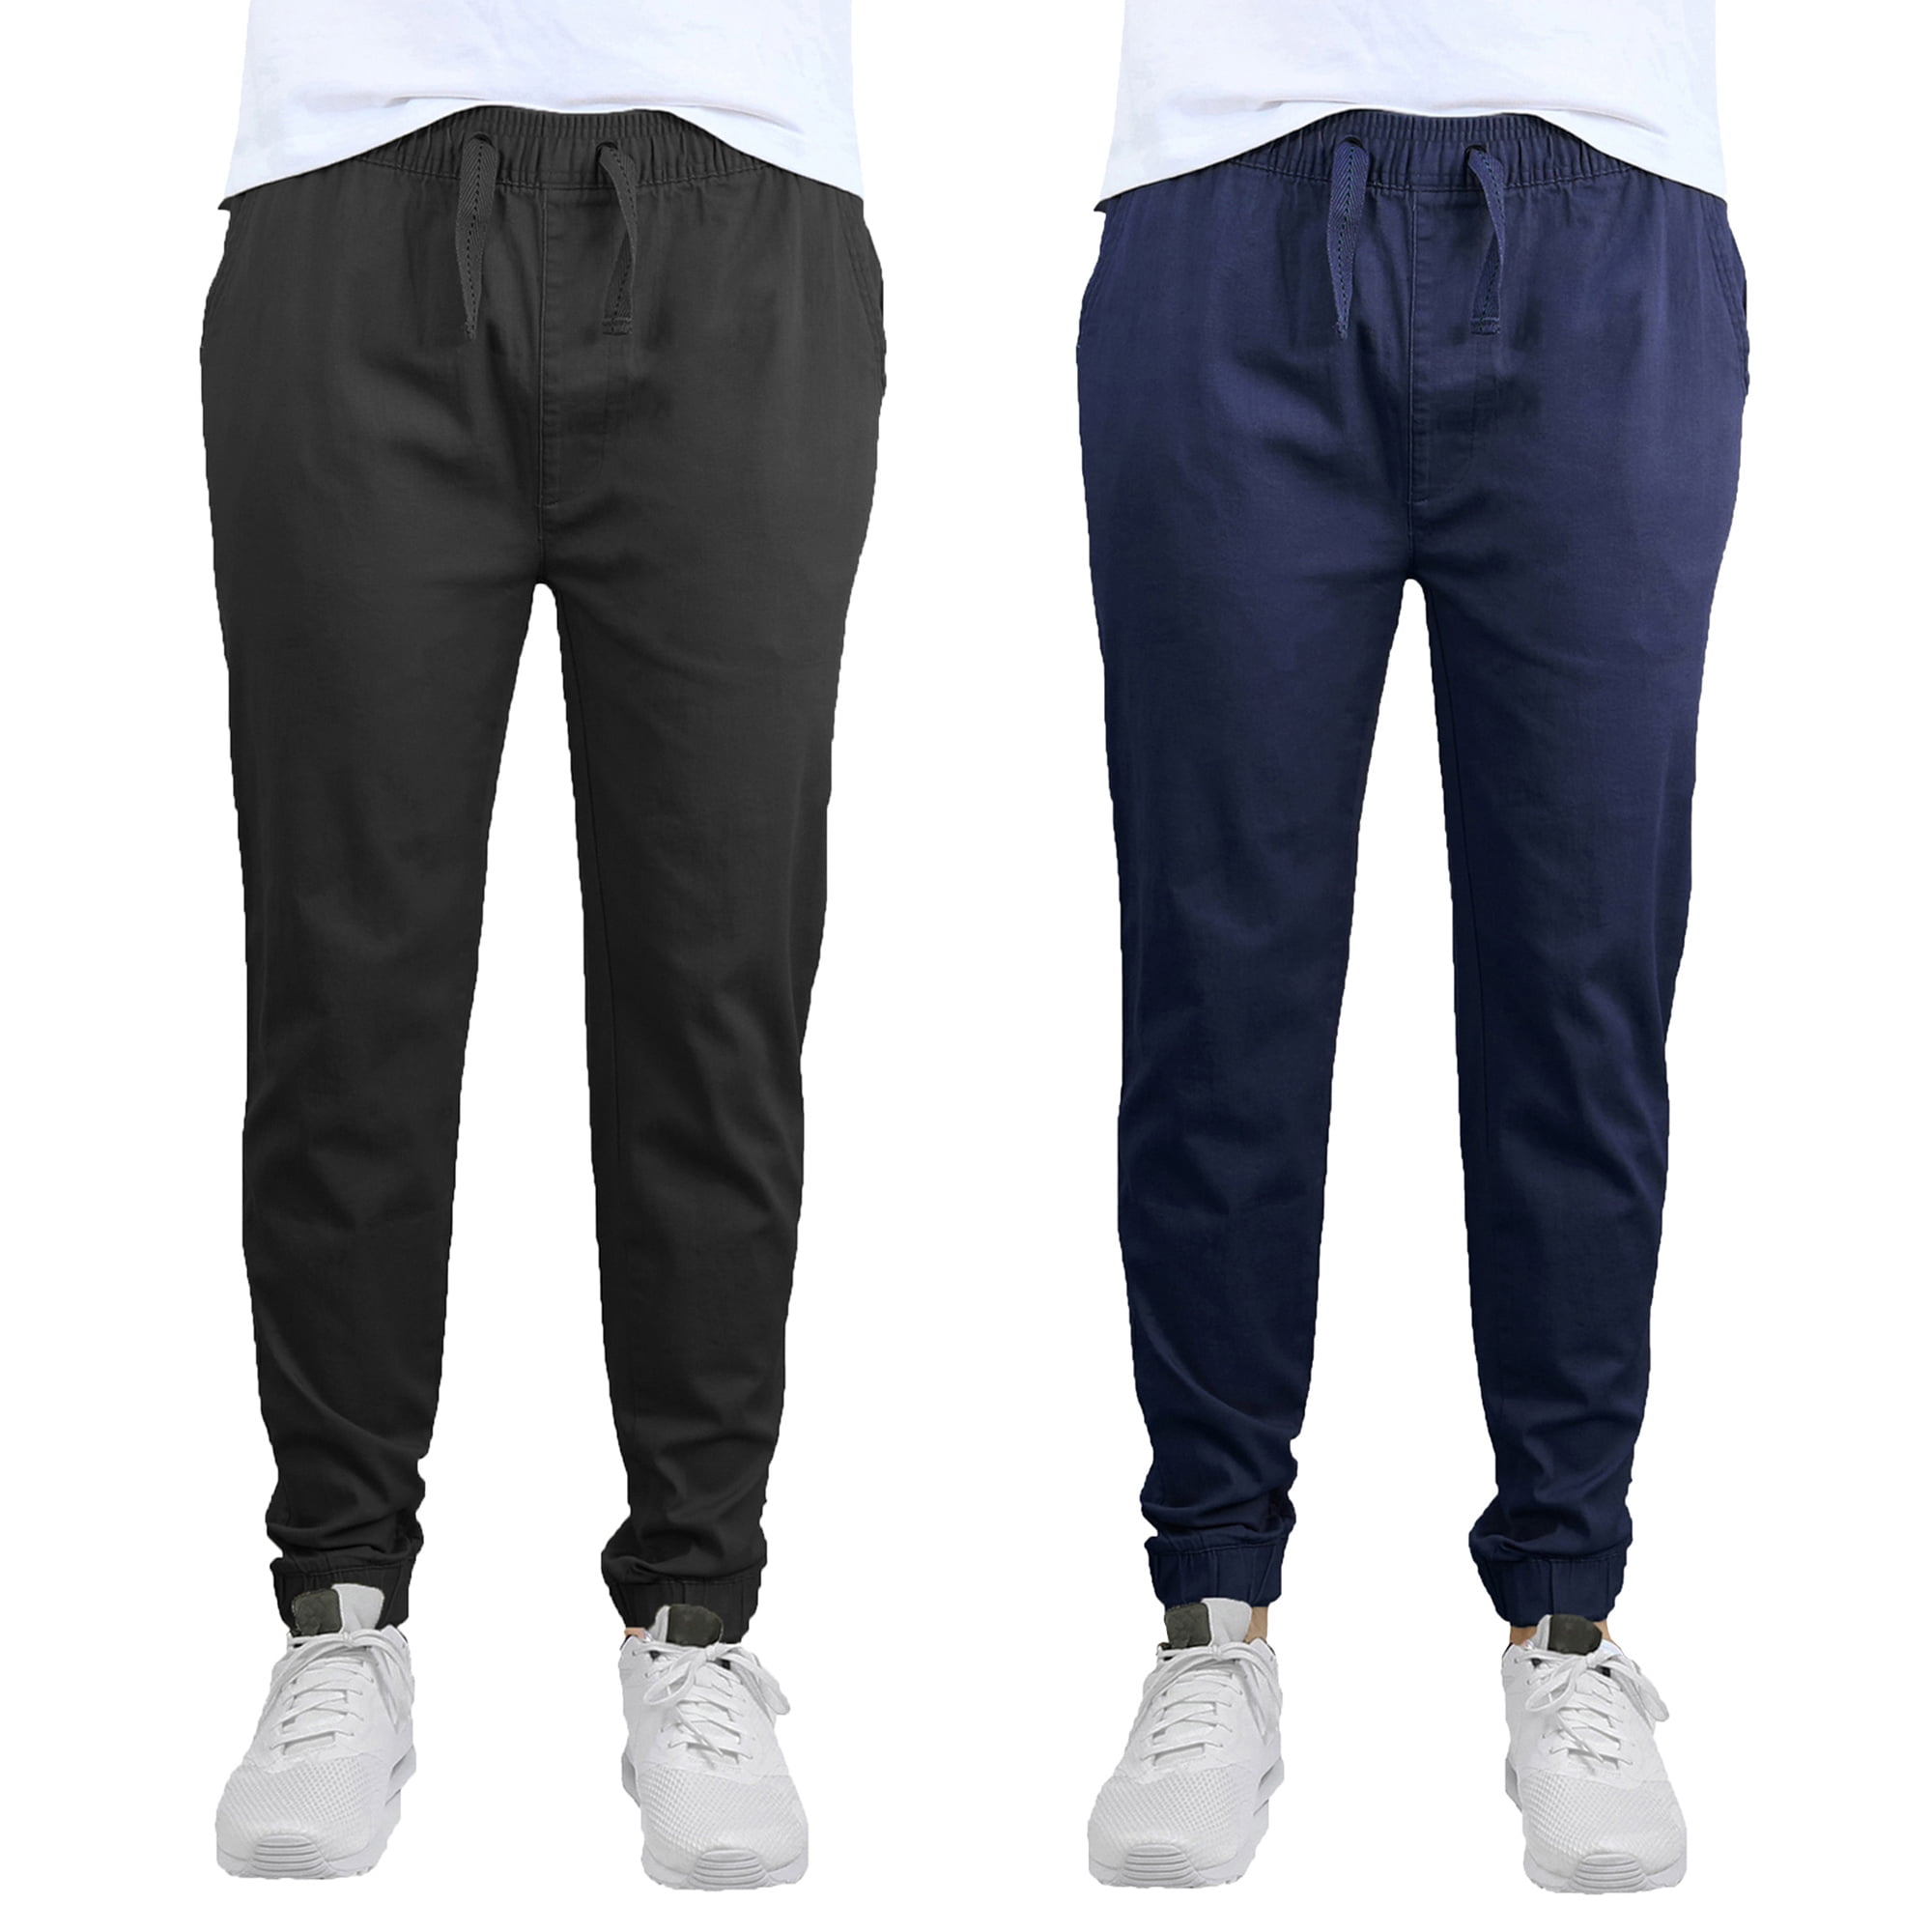 GBH - Mens Slim-Fit Cotton Twill Jogger Pants (2-Pack)